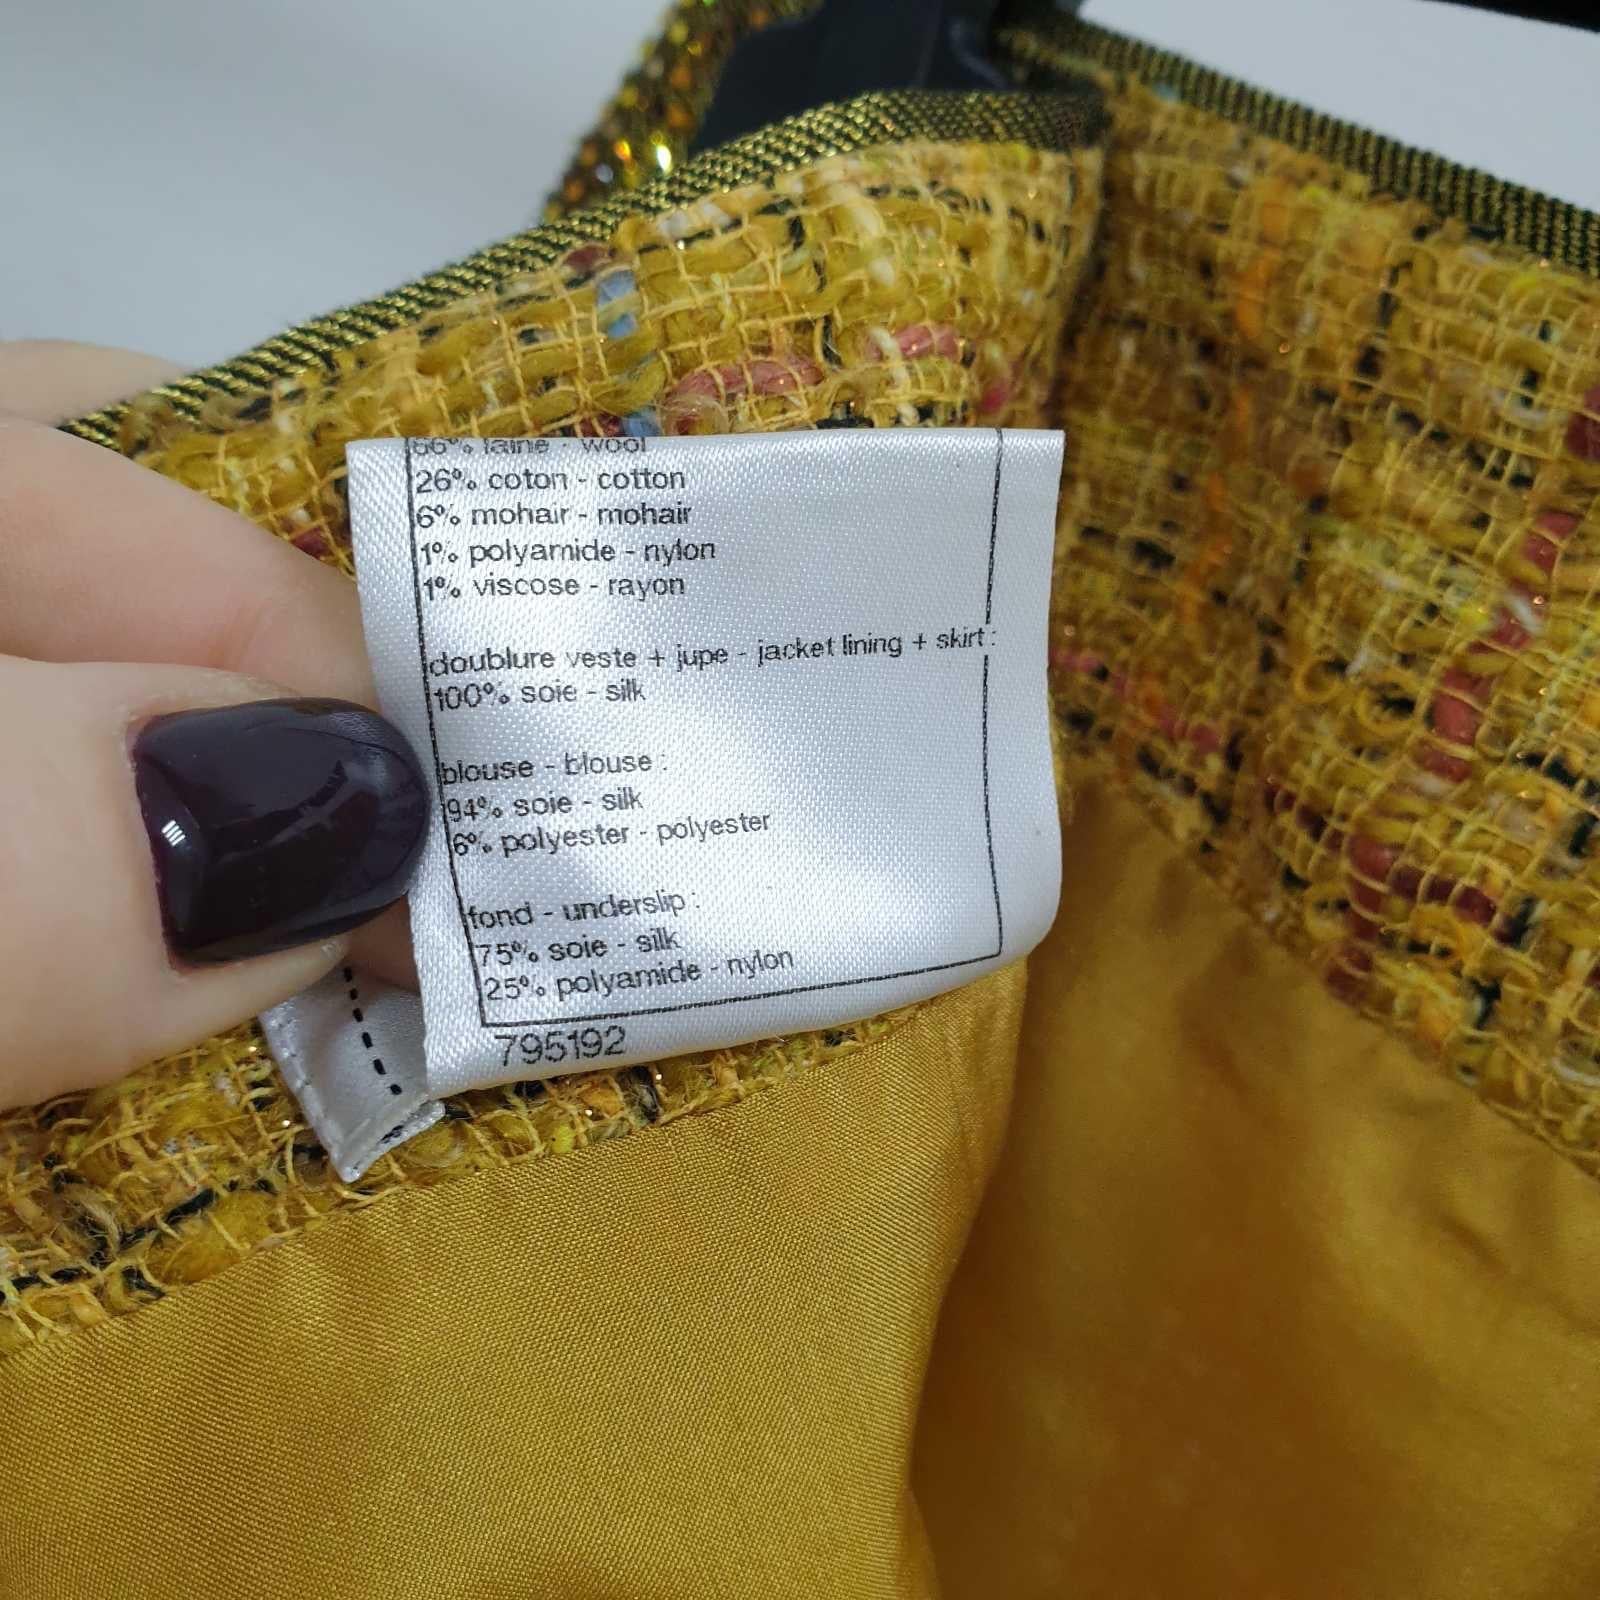 Magnificent CHANEL set from 2012
Sleeveless jacket-36 Fr
Skirt-38 Fr
Yellow tweed 
Very good condition.
Hanger is not included.